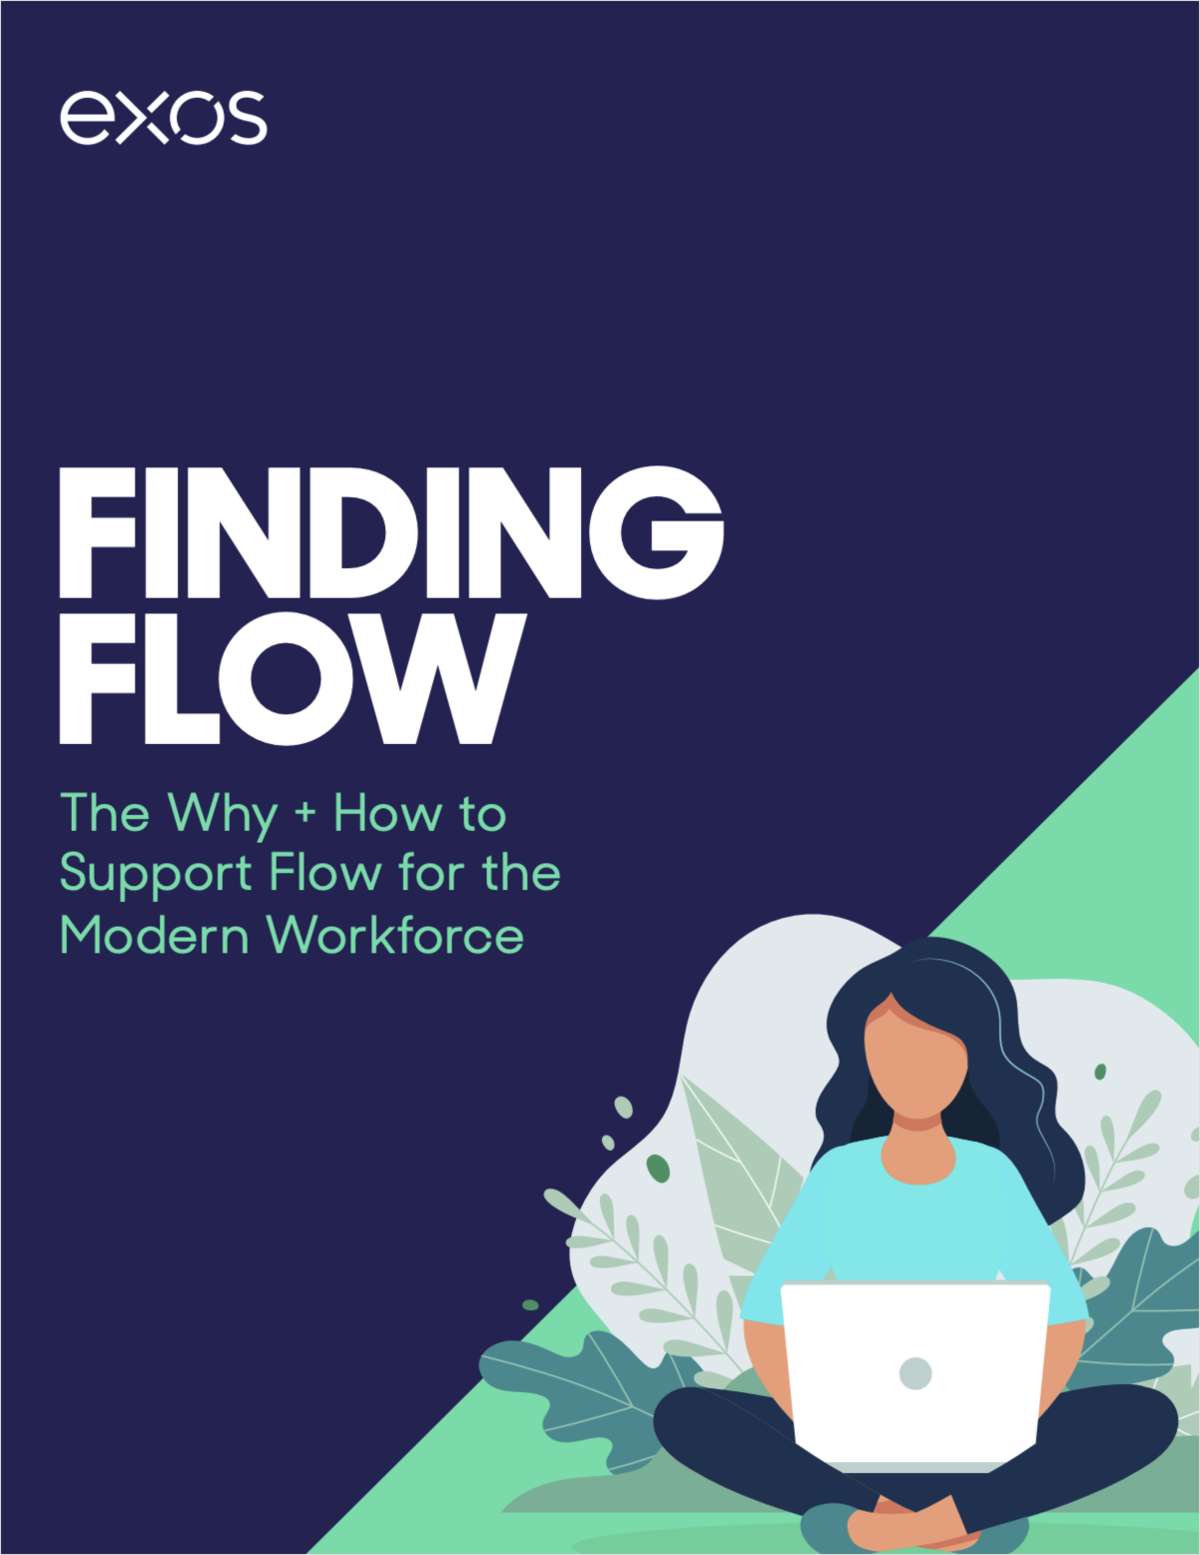 Creating Sustained Employee Productivity through a Flow-Supportive Environment